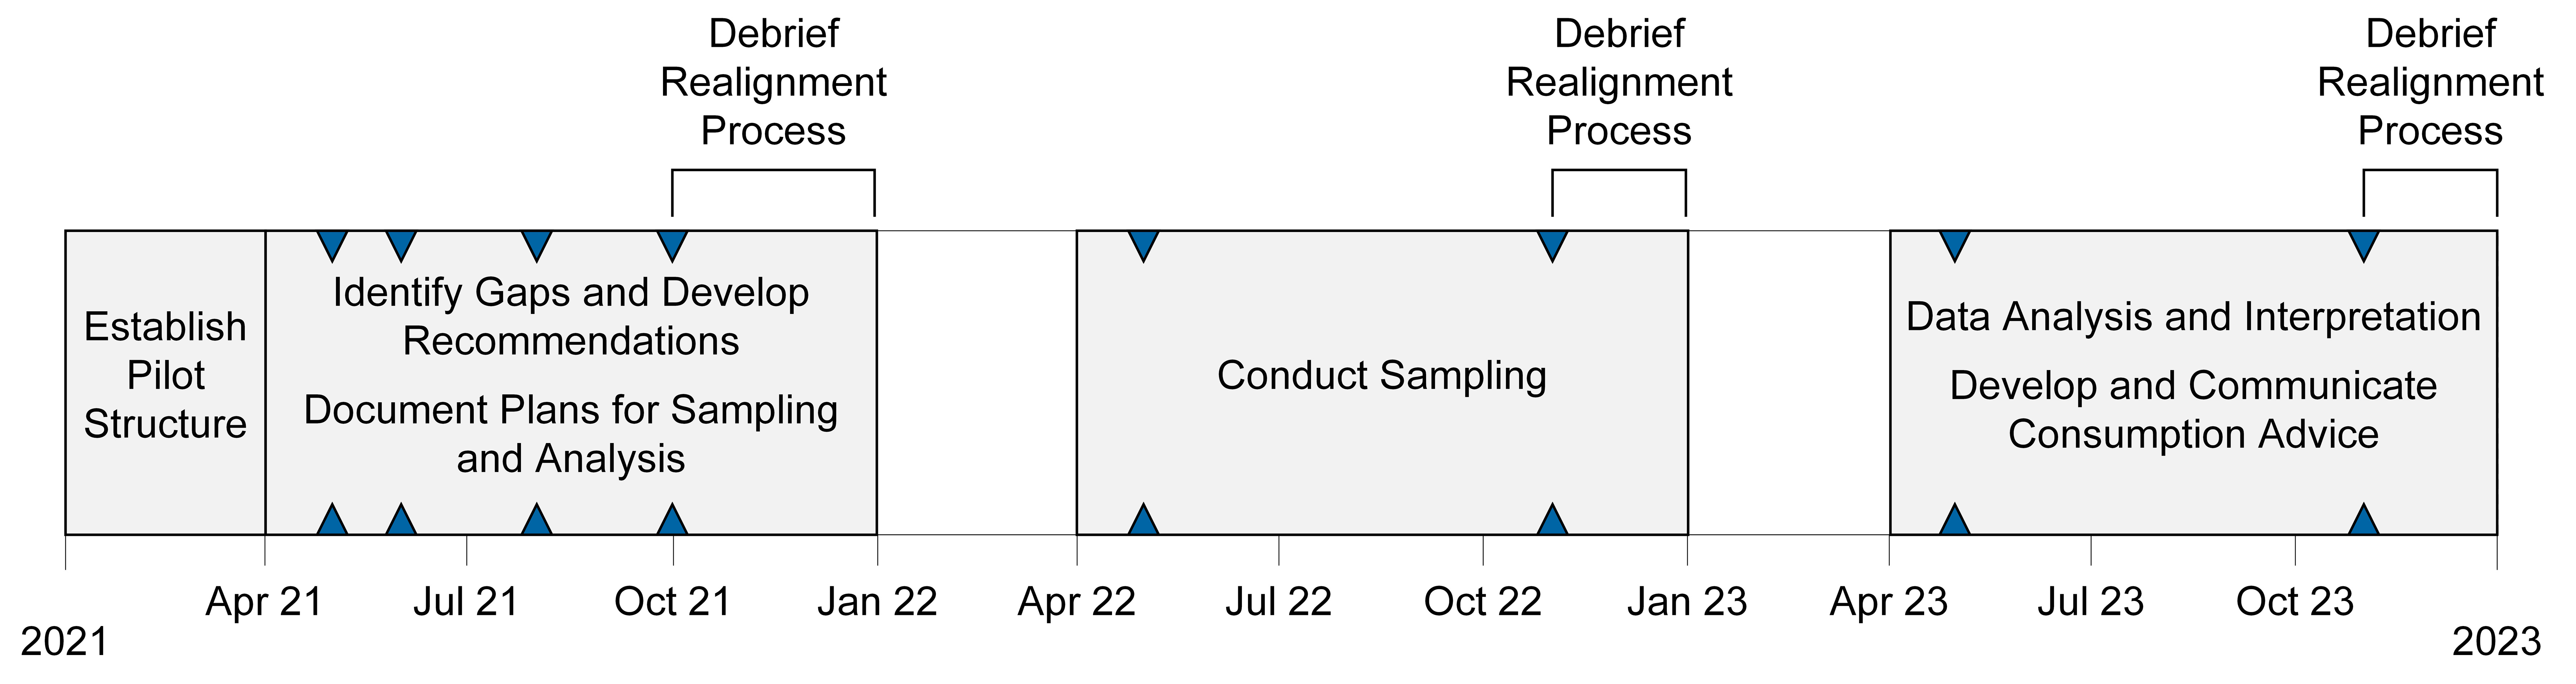 Alt text: Timeline of Phase II of the Bioaccumulation Monitoring Program Realignment. From Jan – Mar 2021, a pilot structure will be established. From Apr – Dec 2021, Data and information gaps will be identified, recommendations and associated sampling and analysis plans will be developed. From Apr – Dec 2022, Realignment sampling will be conducted. From Apr – Dec 2023, Data analysis and interpretation will be conducted, and corresponding consumption advice will be developed and communicated. At the end of each year, a debrief of the realignment process (thus far) will be conducted. Community Advisory Committee Meetings will take place around May, Jun, Aug, and Oct 2021, May and Nov 2022, and May and Nov 2023